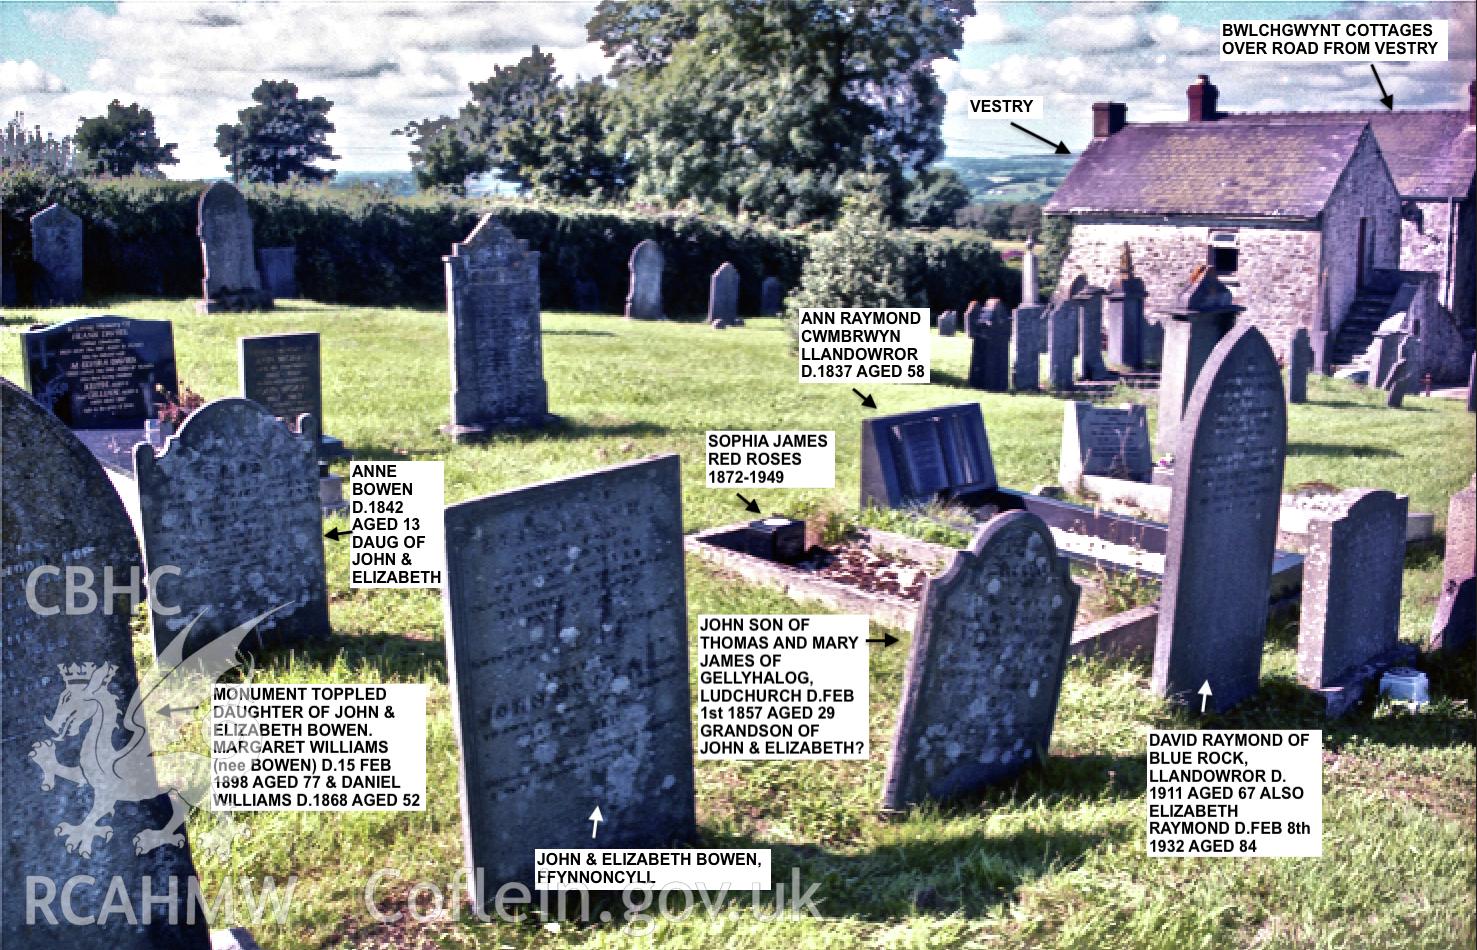 'Bwlchgwynt chapel cemetery showing a cluster of grave monuments the Bowen family. Taken in 2007, before renovation started.  Also showing the Vestry with the outside stairs.' Photographed and annotated by Keith Bowen.